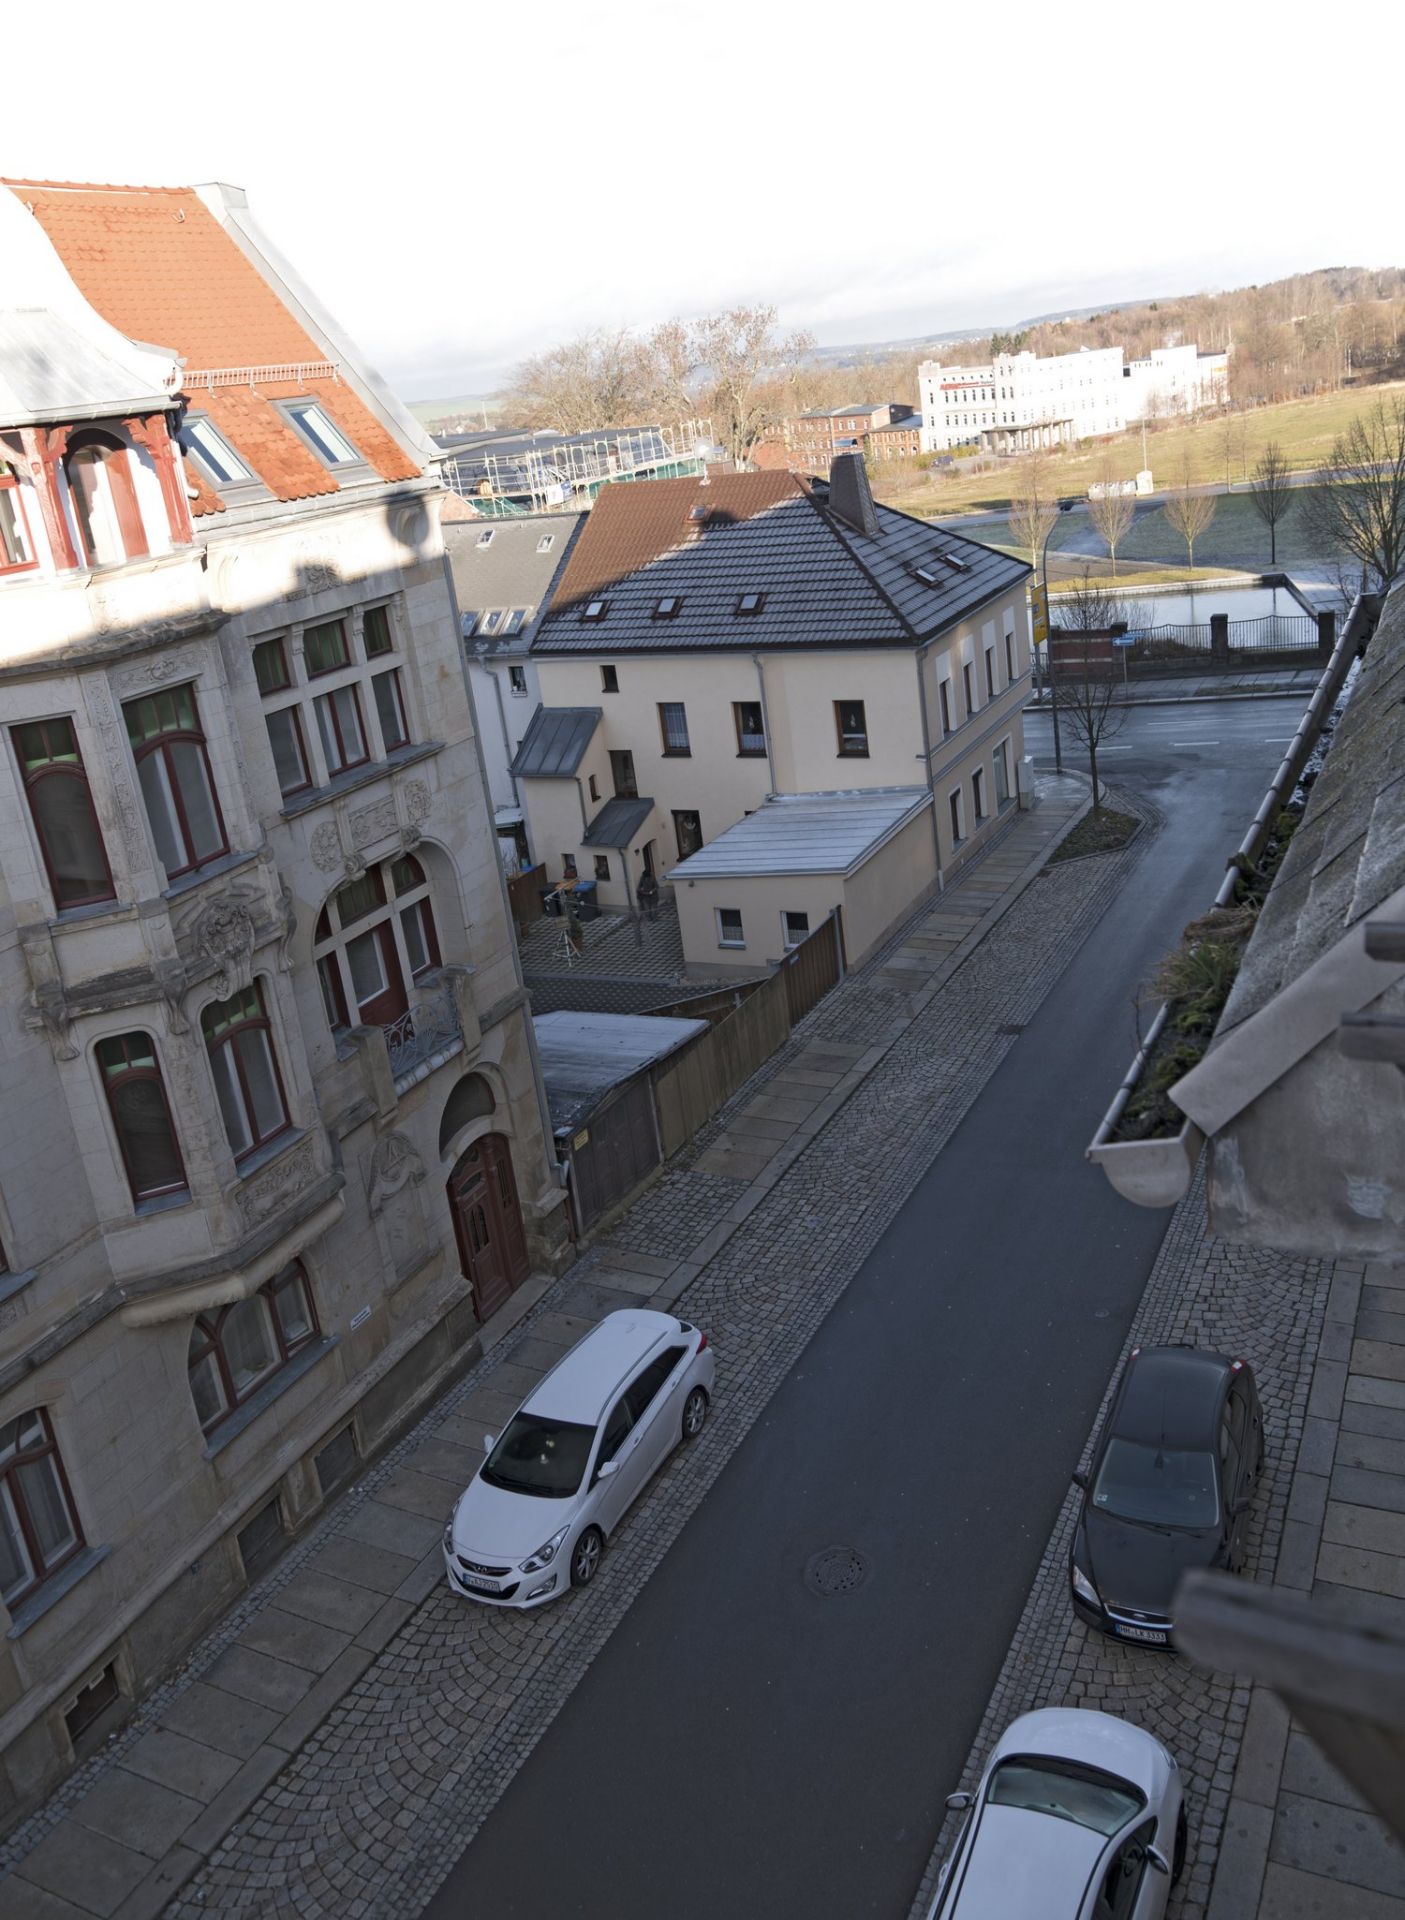 4 STOREY GERMANY APARTMENT BLOCK IN ADDITION TO A FULL BASEMENT + HUGE ATTIC! - Image 7 of 76